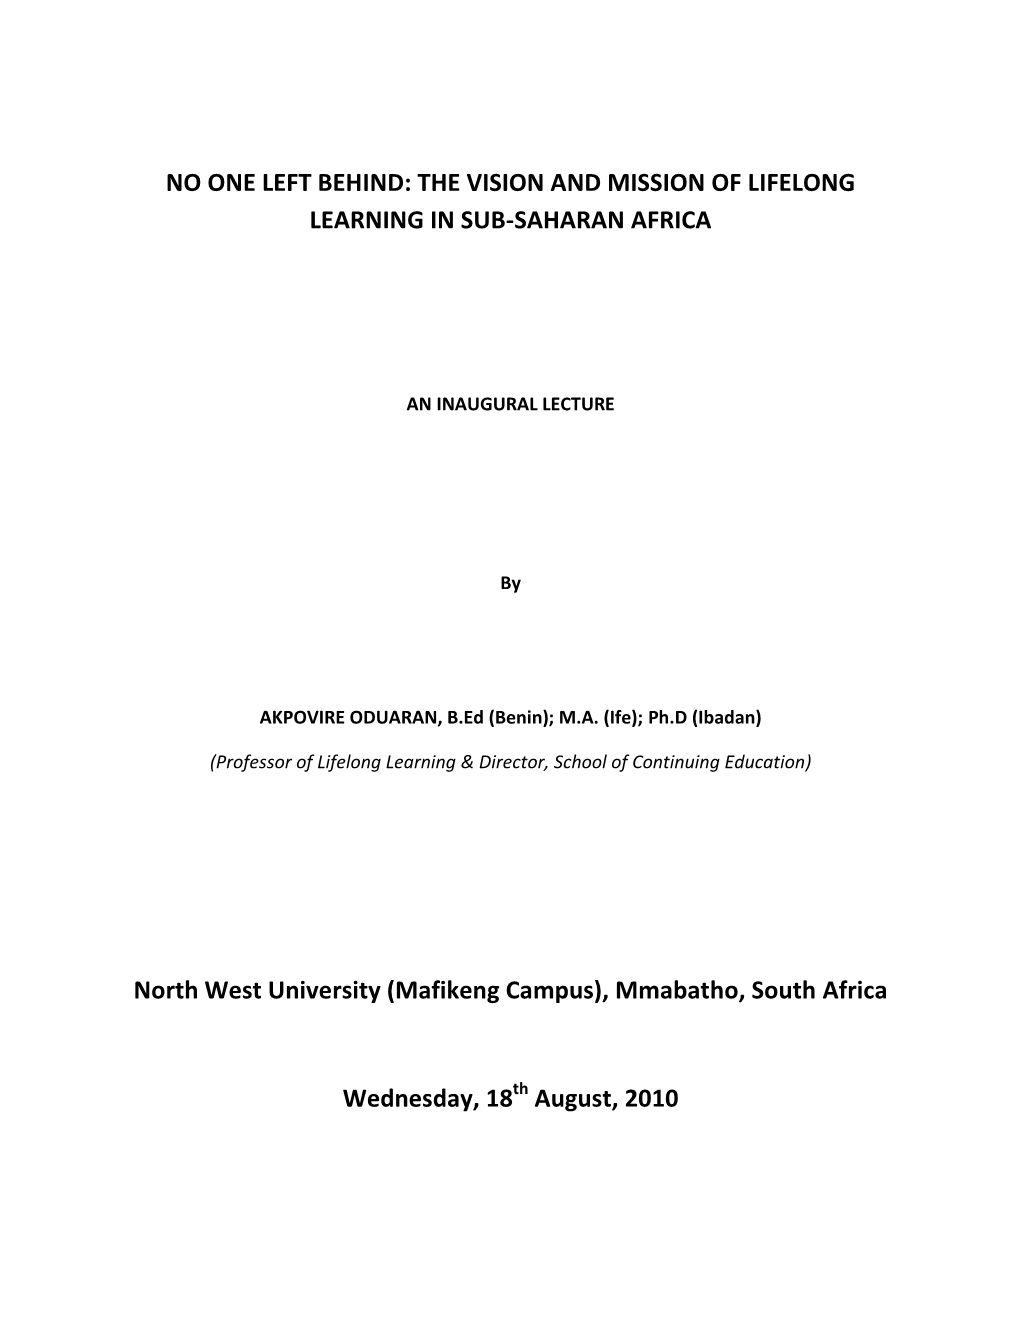 The Mission and Vision of Lifelong Learning in Sub-Saharan Africa